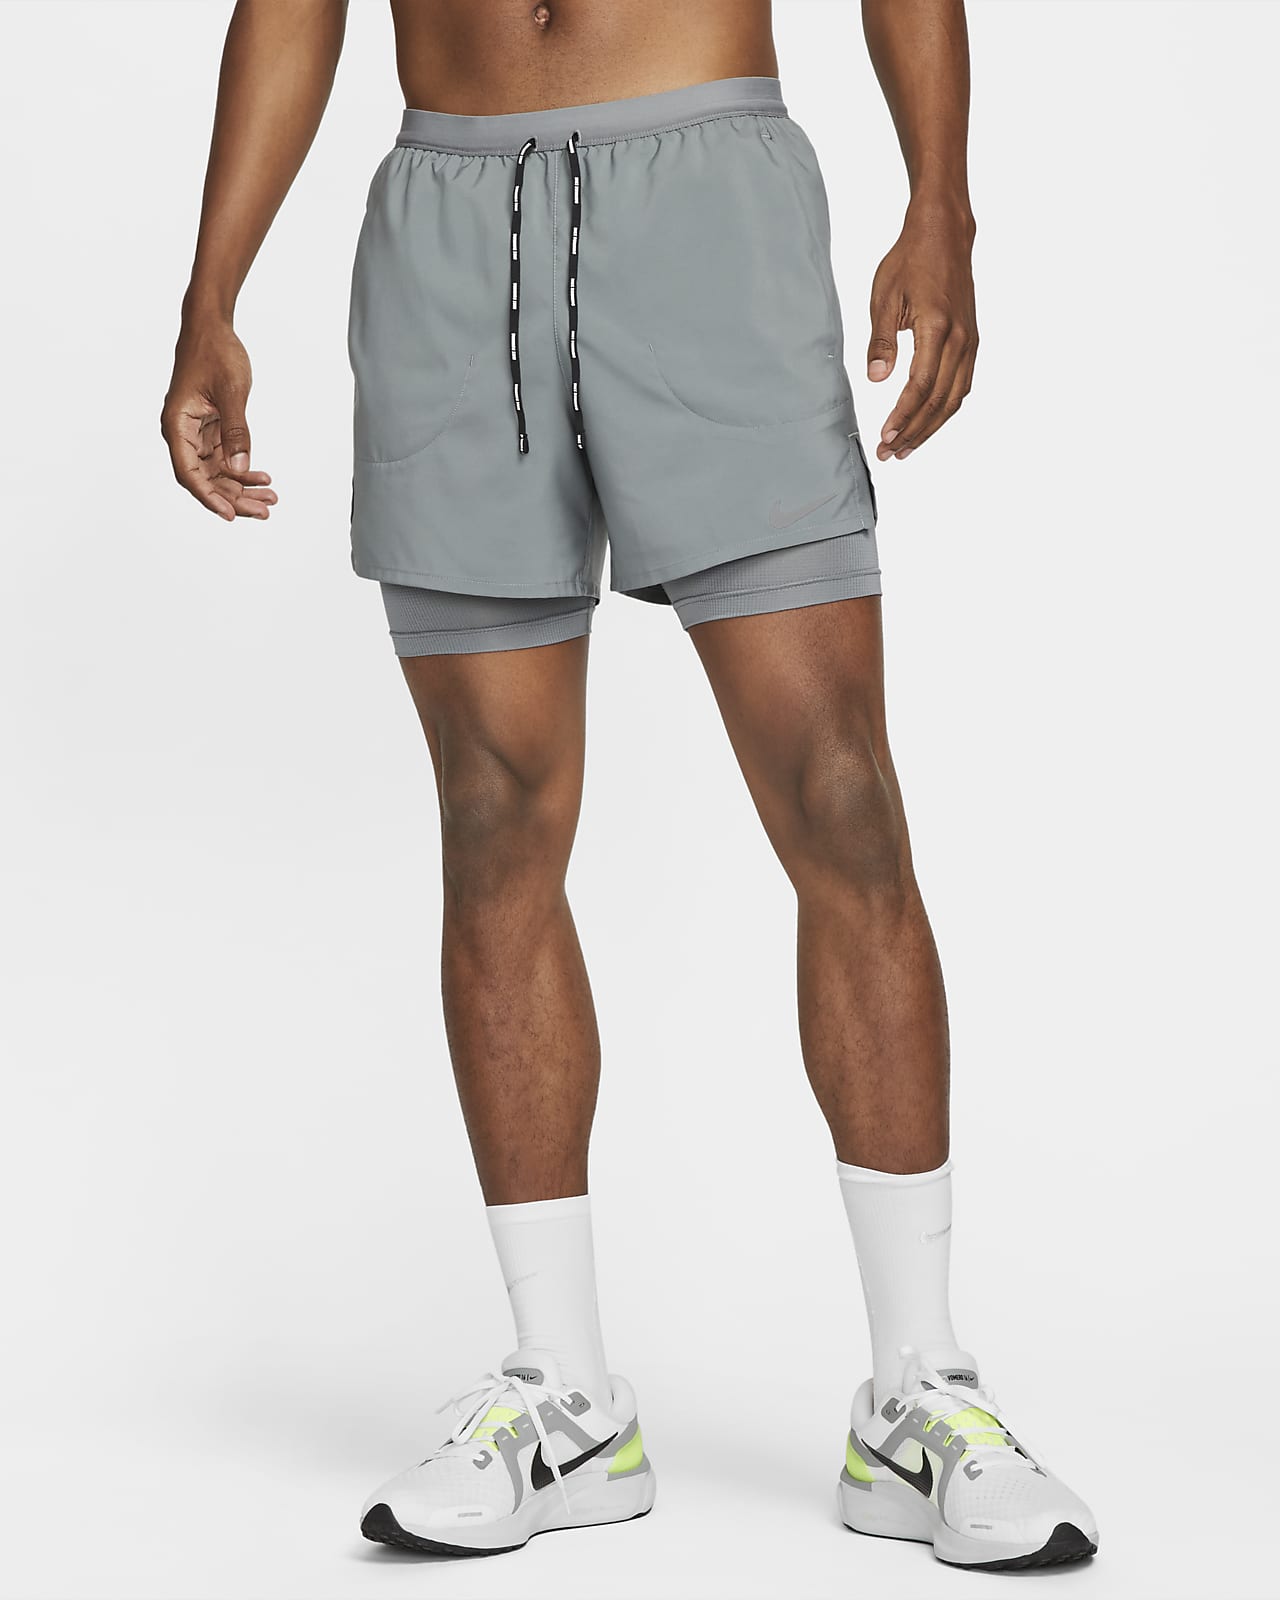 The Best Running Shorts for Men, by Nike. Nike JP